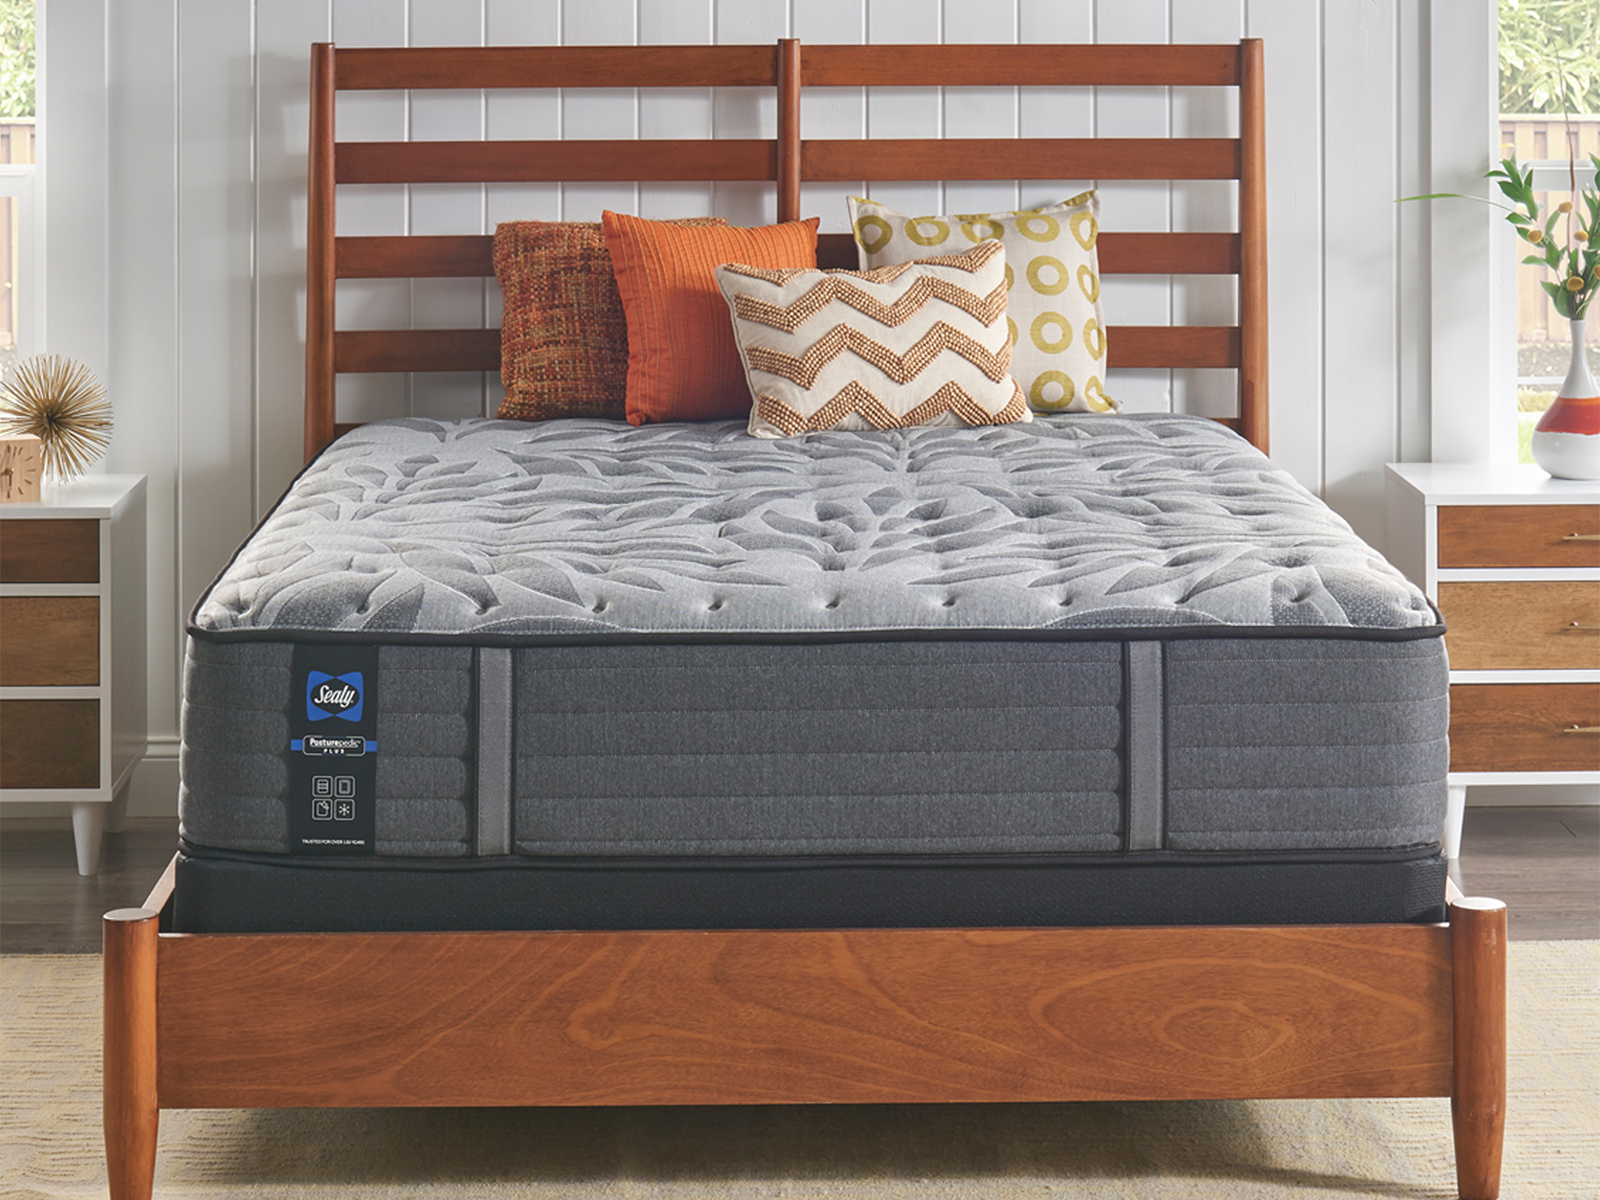 Sealy Twin Extra Long Mattress | Posturepedic Plus | Ultra Firm | Satisfied II 12